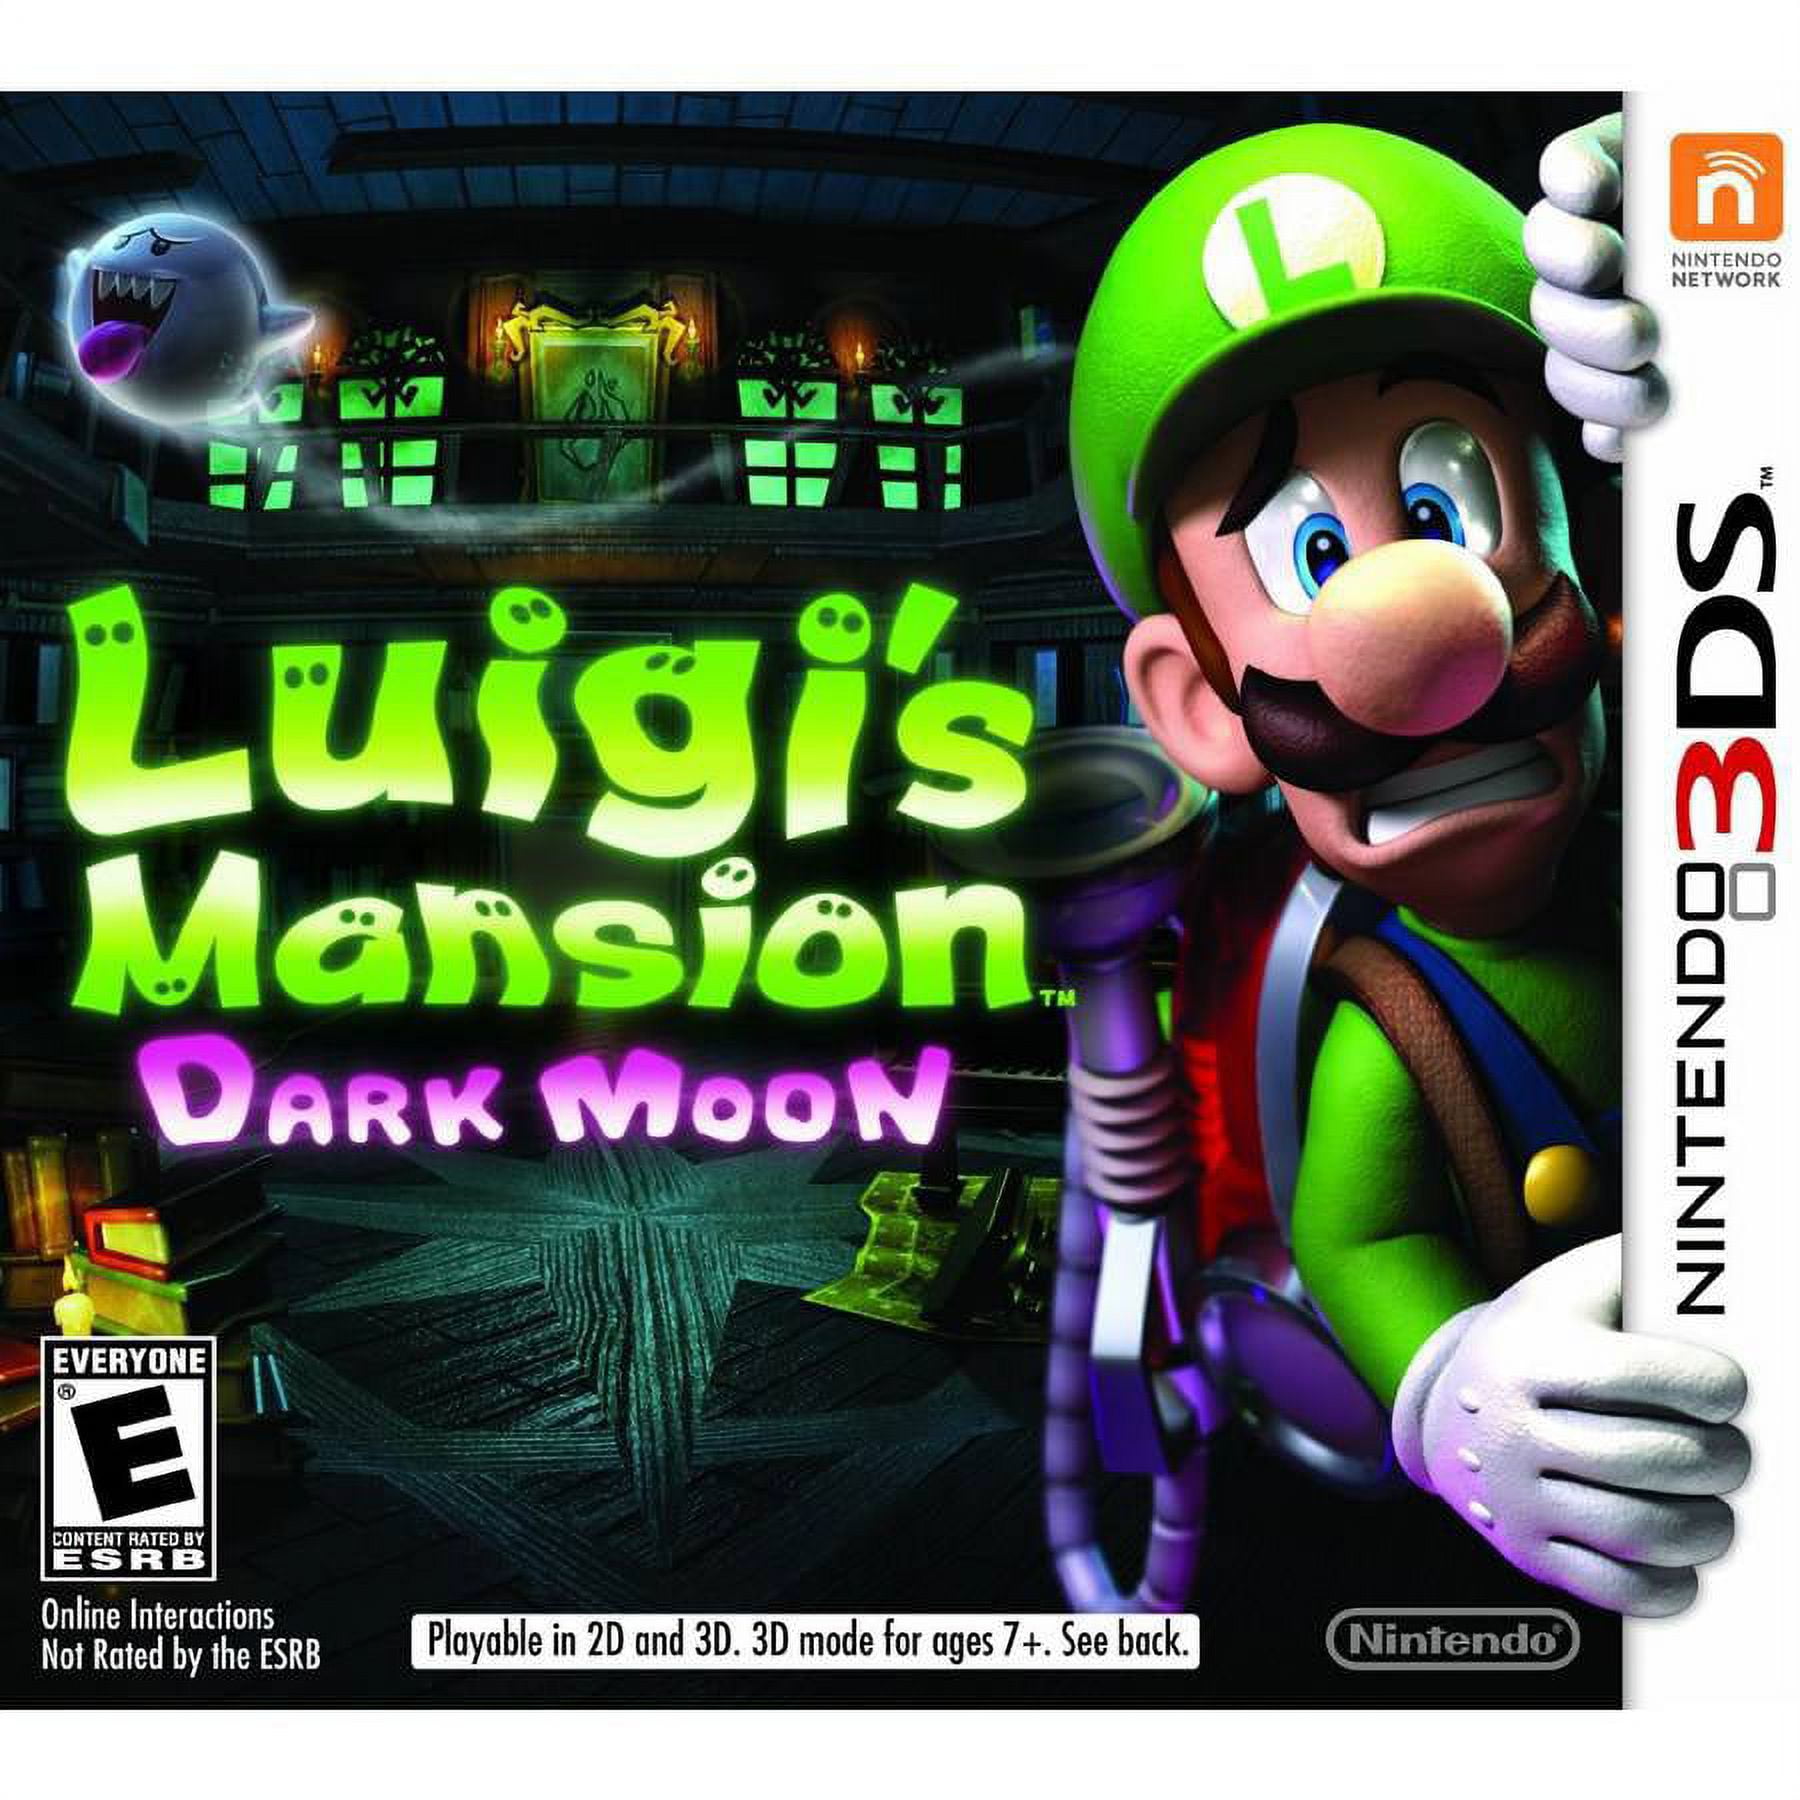 Luigi's Mansion 3 tips: 6 things to know before you go ghost